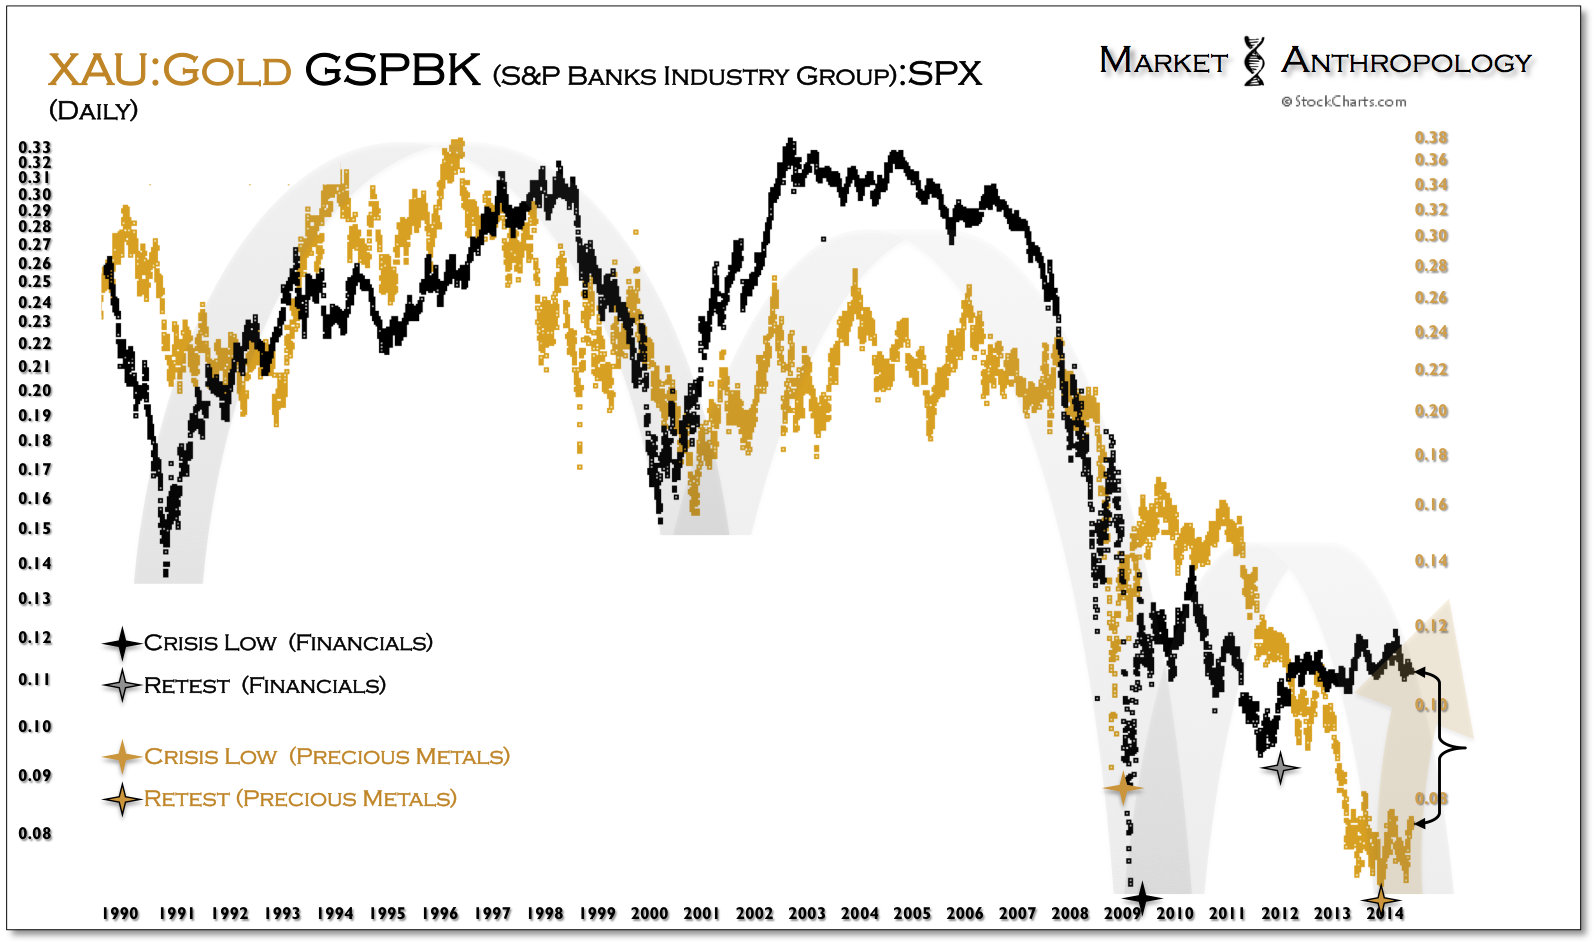 XAU:Gold:S&P Banks:SPX, Daily